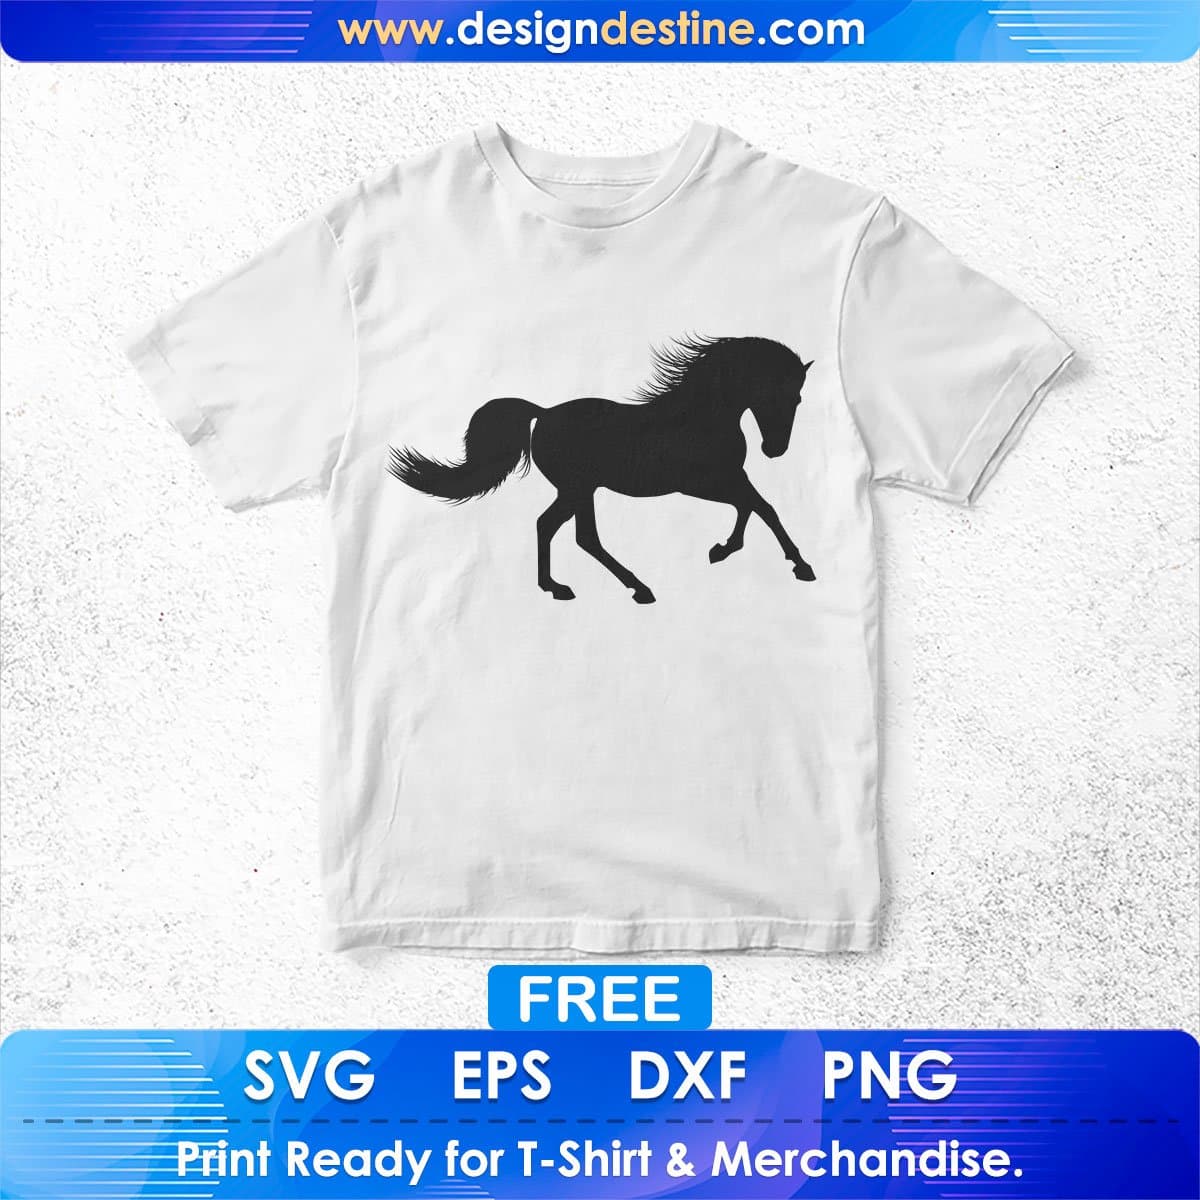 Free Crazy Horse Vector Silhouette T shirt Design In Png Svg Cutting Printable Files